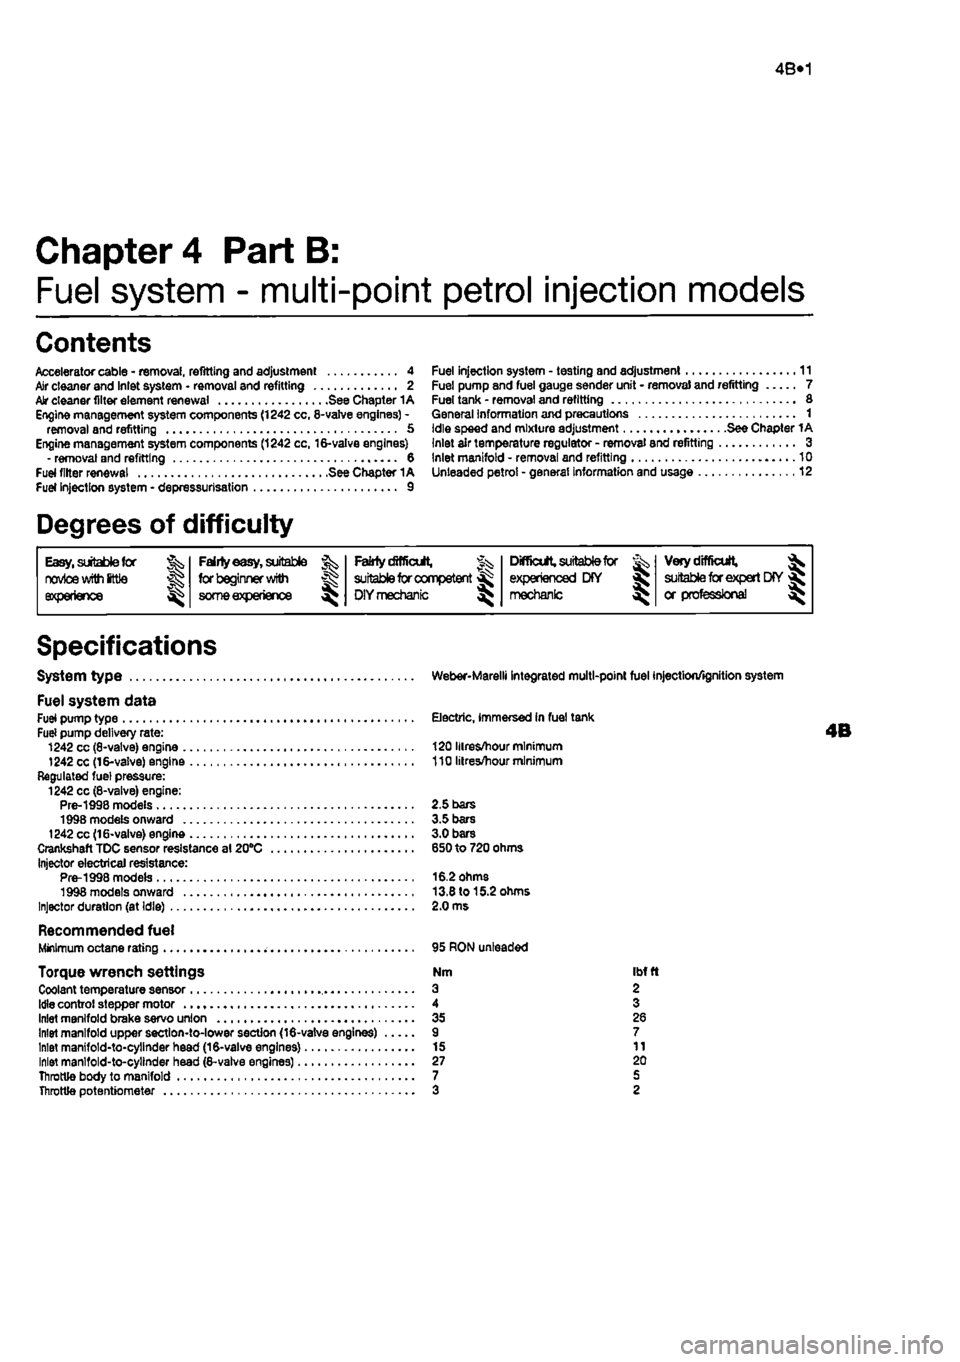 FIAT PUNTO 1994 176 / 1.G Workshop Manual 
4B*1 
Chapter 4 Part B: 
Fuel system - multi-point petrol injection models 
Contents 
Accelerator cable - removal, refitting and adjustment 4 Air cleaner and Inlet system • removal and refitting 2 